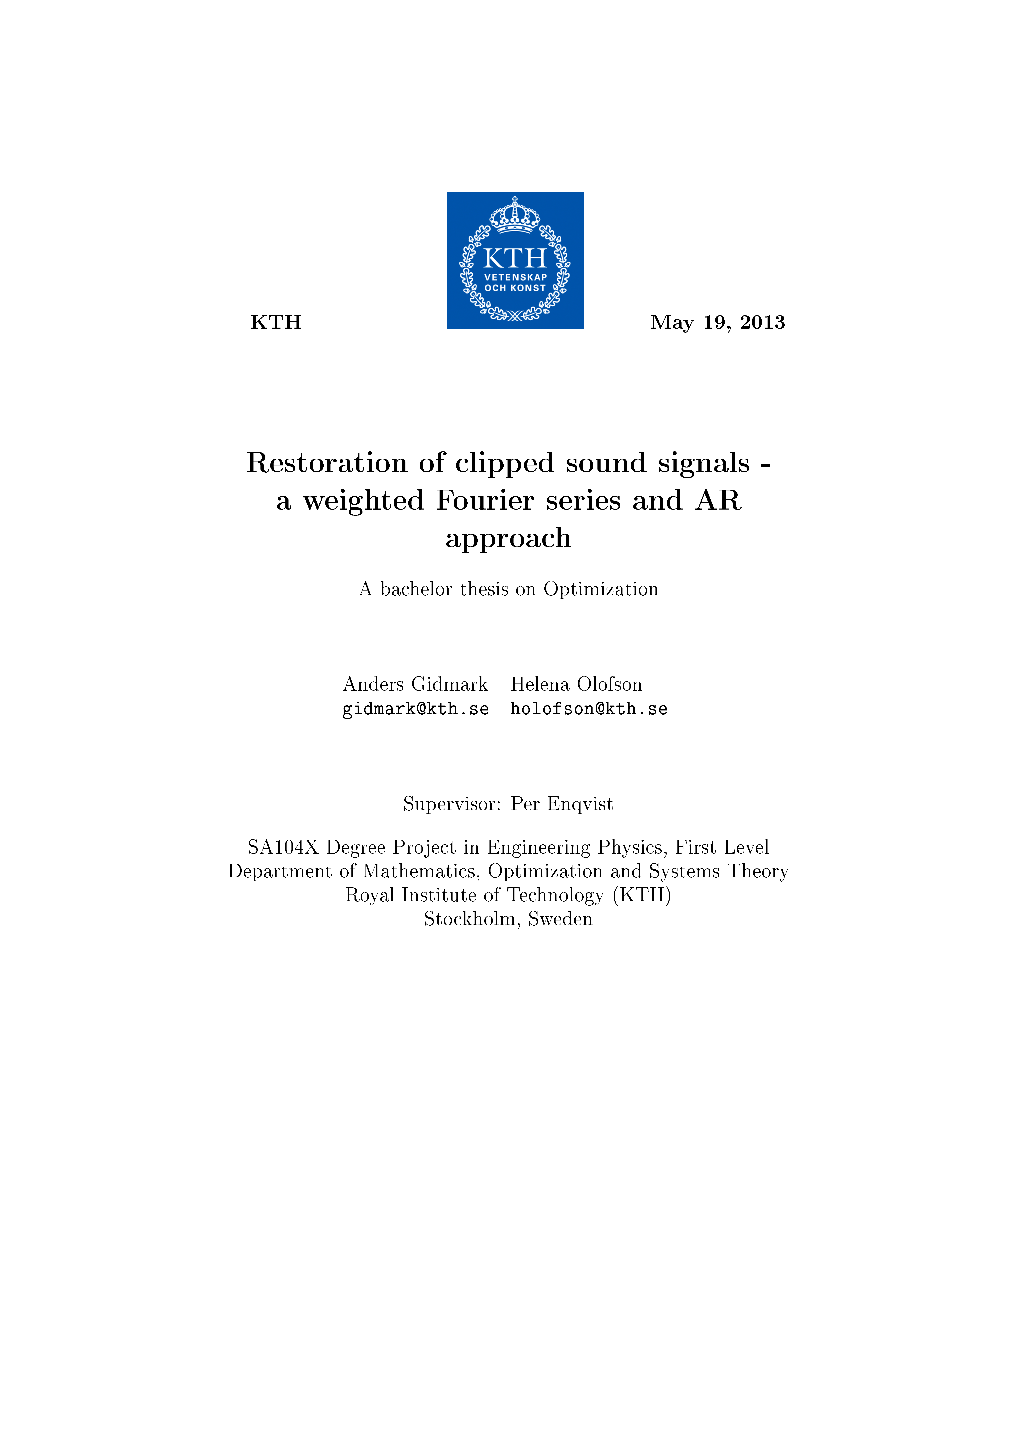 Restoration of Clipped Sound Signals - a Weighted Fourier Series and AR Approach